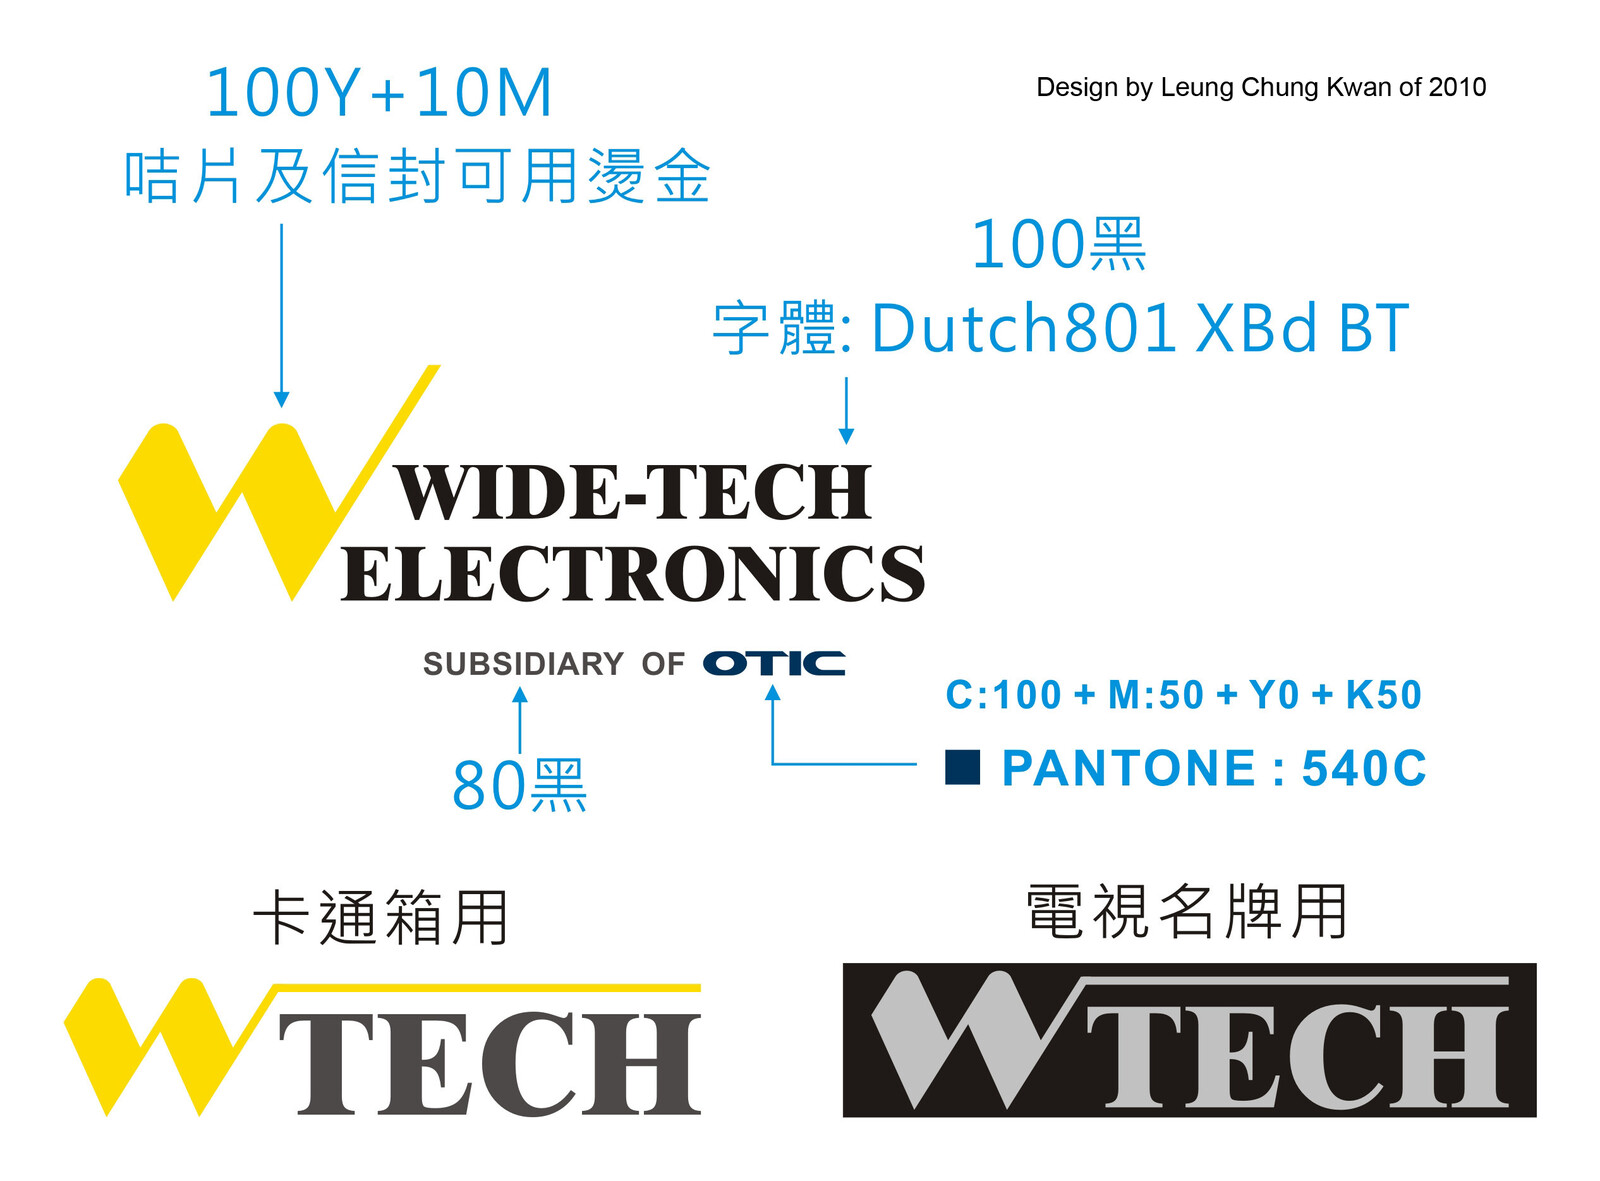 💎 Logo | Design by Leung Chung Kwan on 2010 💎
Brand Name︰WTECH | Client︰Wide-Tech Electronics International Limited